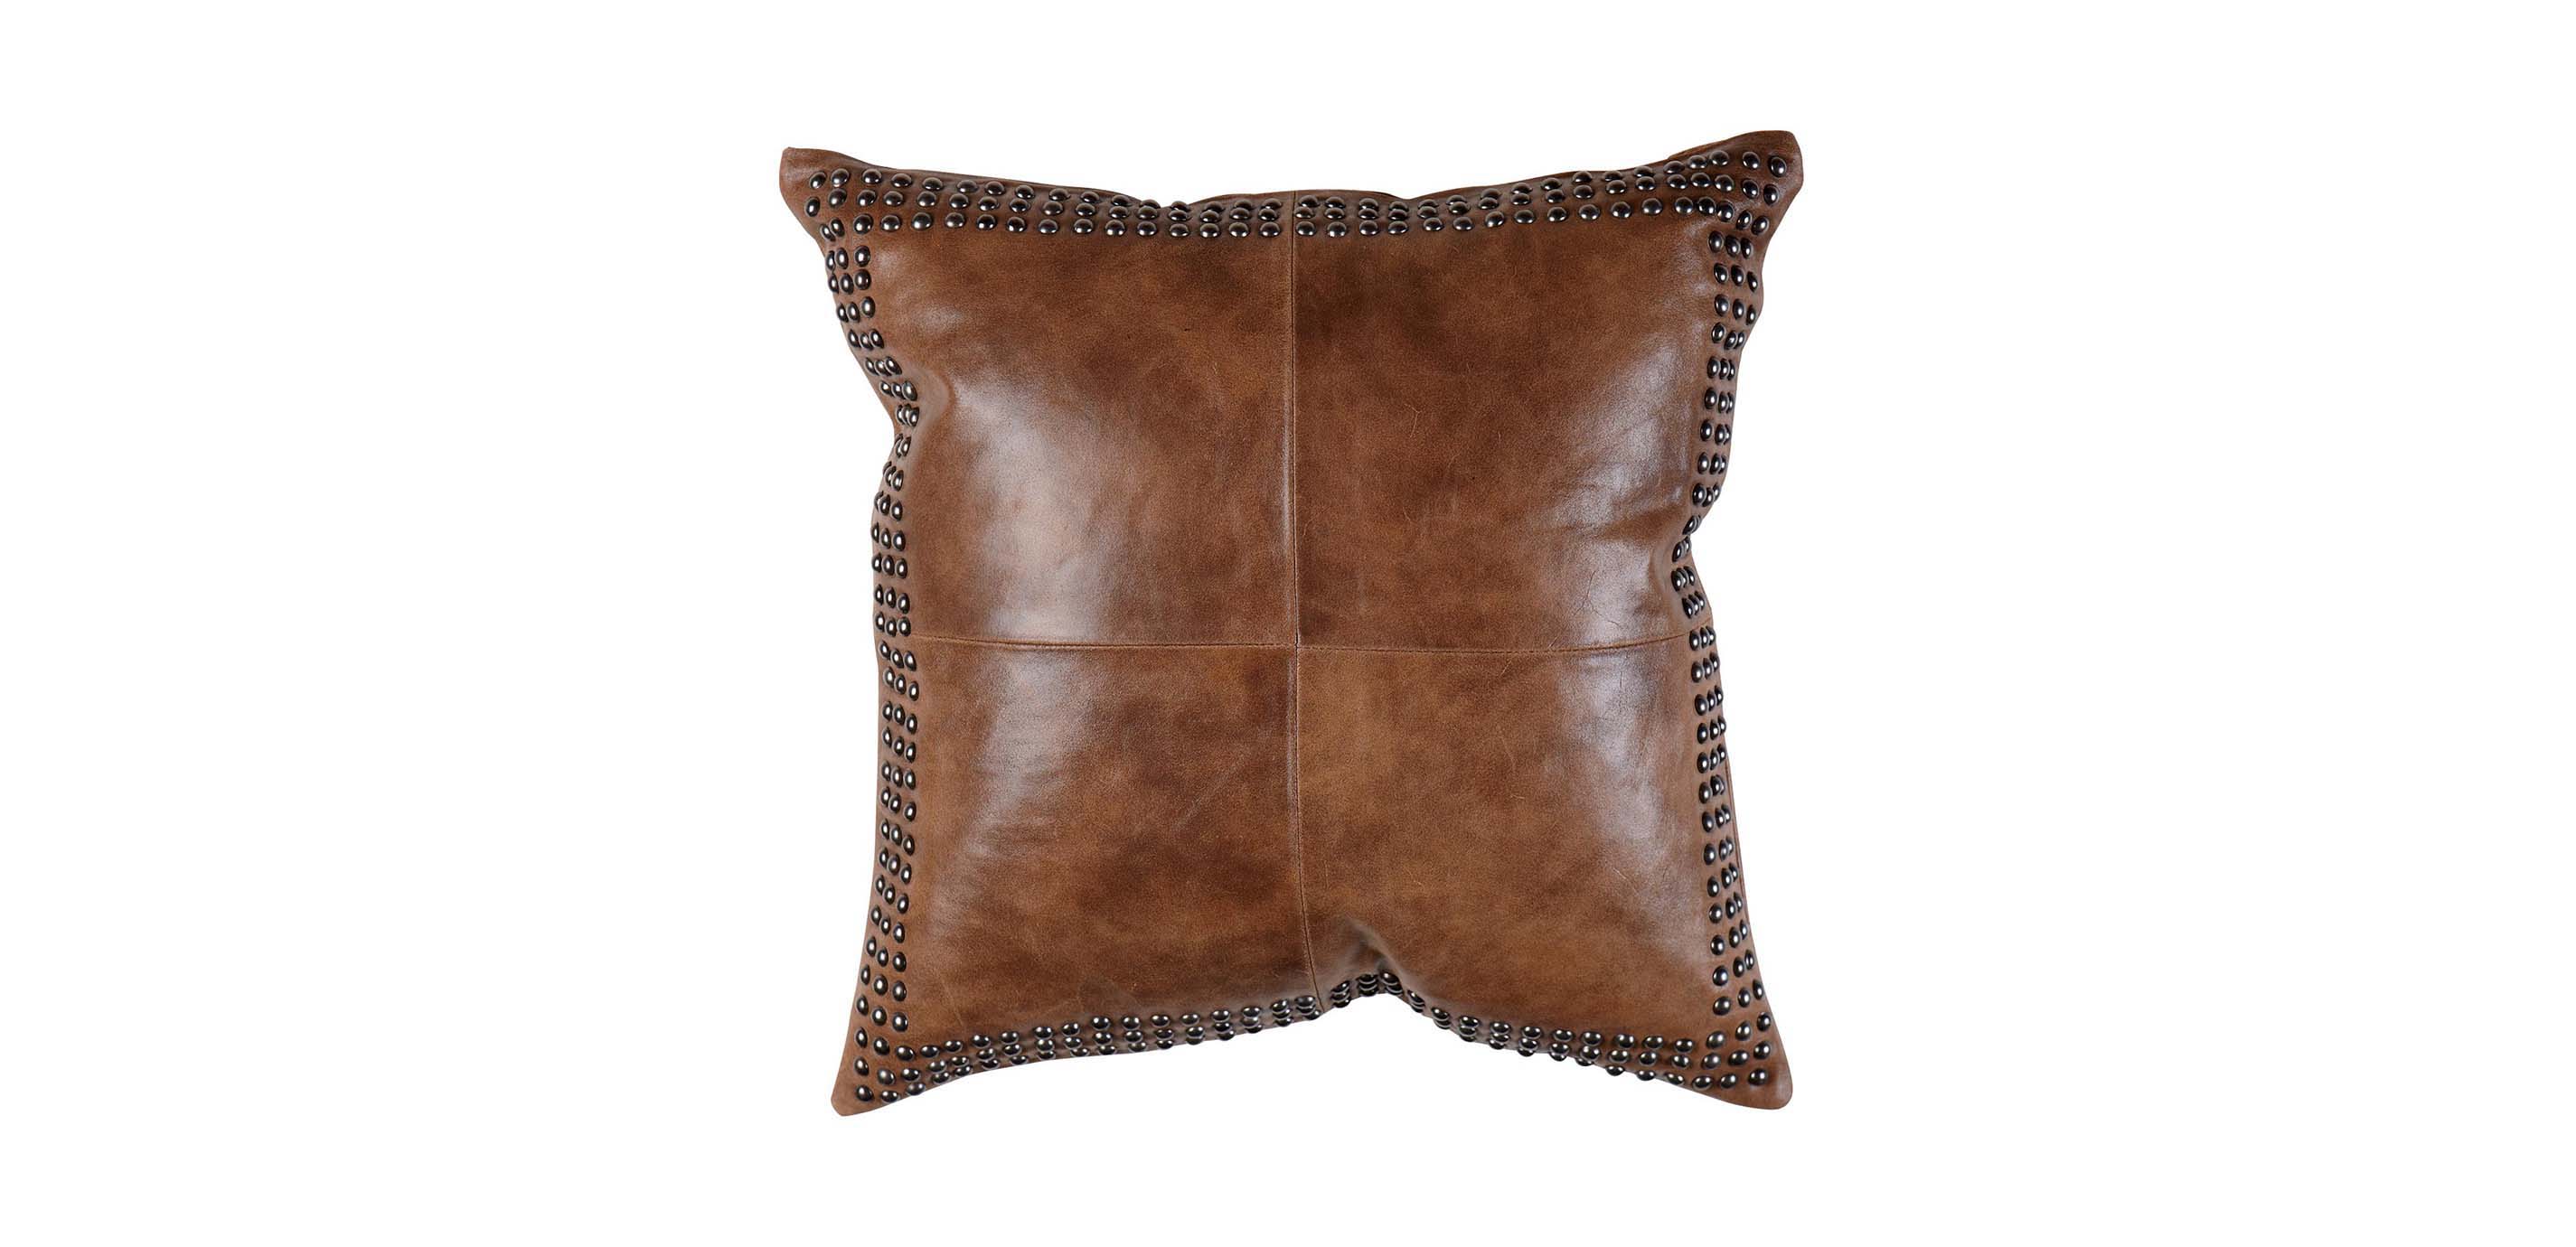 Brown Worn Leather Pillow Pillows, Brown Leather Pillow